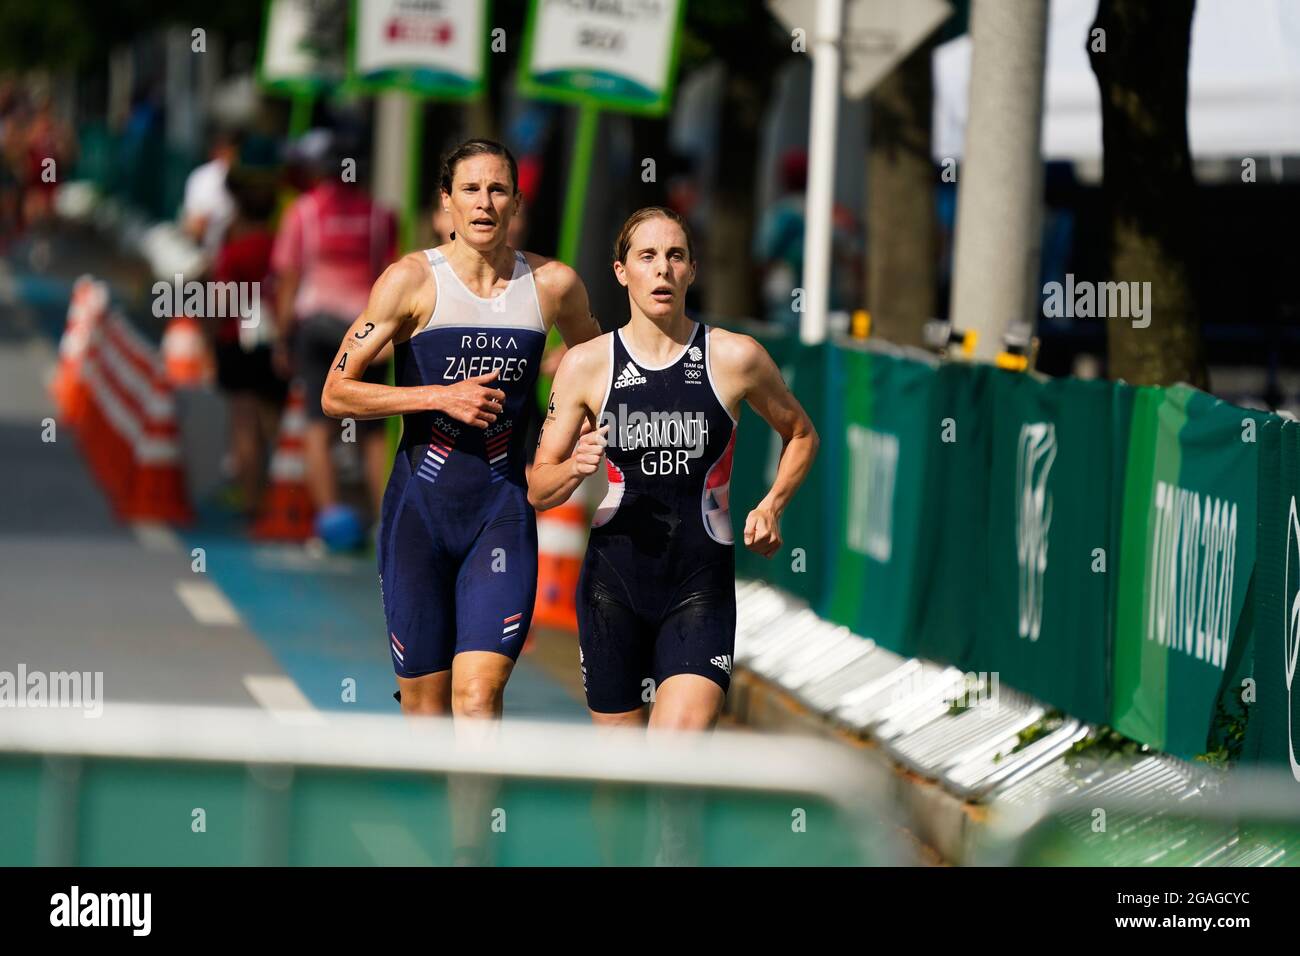 Tokyo, Japan. 31st July, 2021. (L-R) Katie ZAFERES (USA), Jessica LEARMONTH (GBR) Triathlon : Mixed Relay during the Tokyo 2020 Olympic Games at the Odaiba Marine Park in Tokyo, Japan . Credit: Kohei Maruyama/AFLO/Alamy Live News Stock Photo